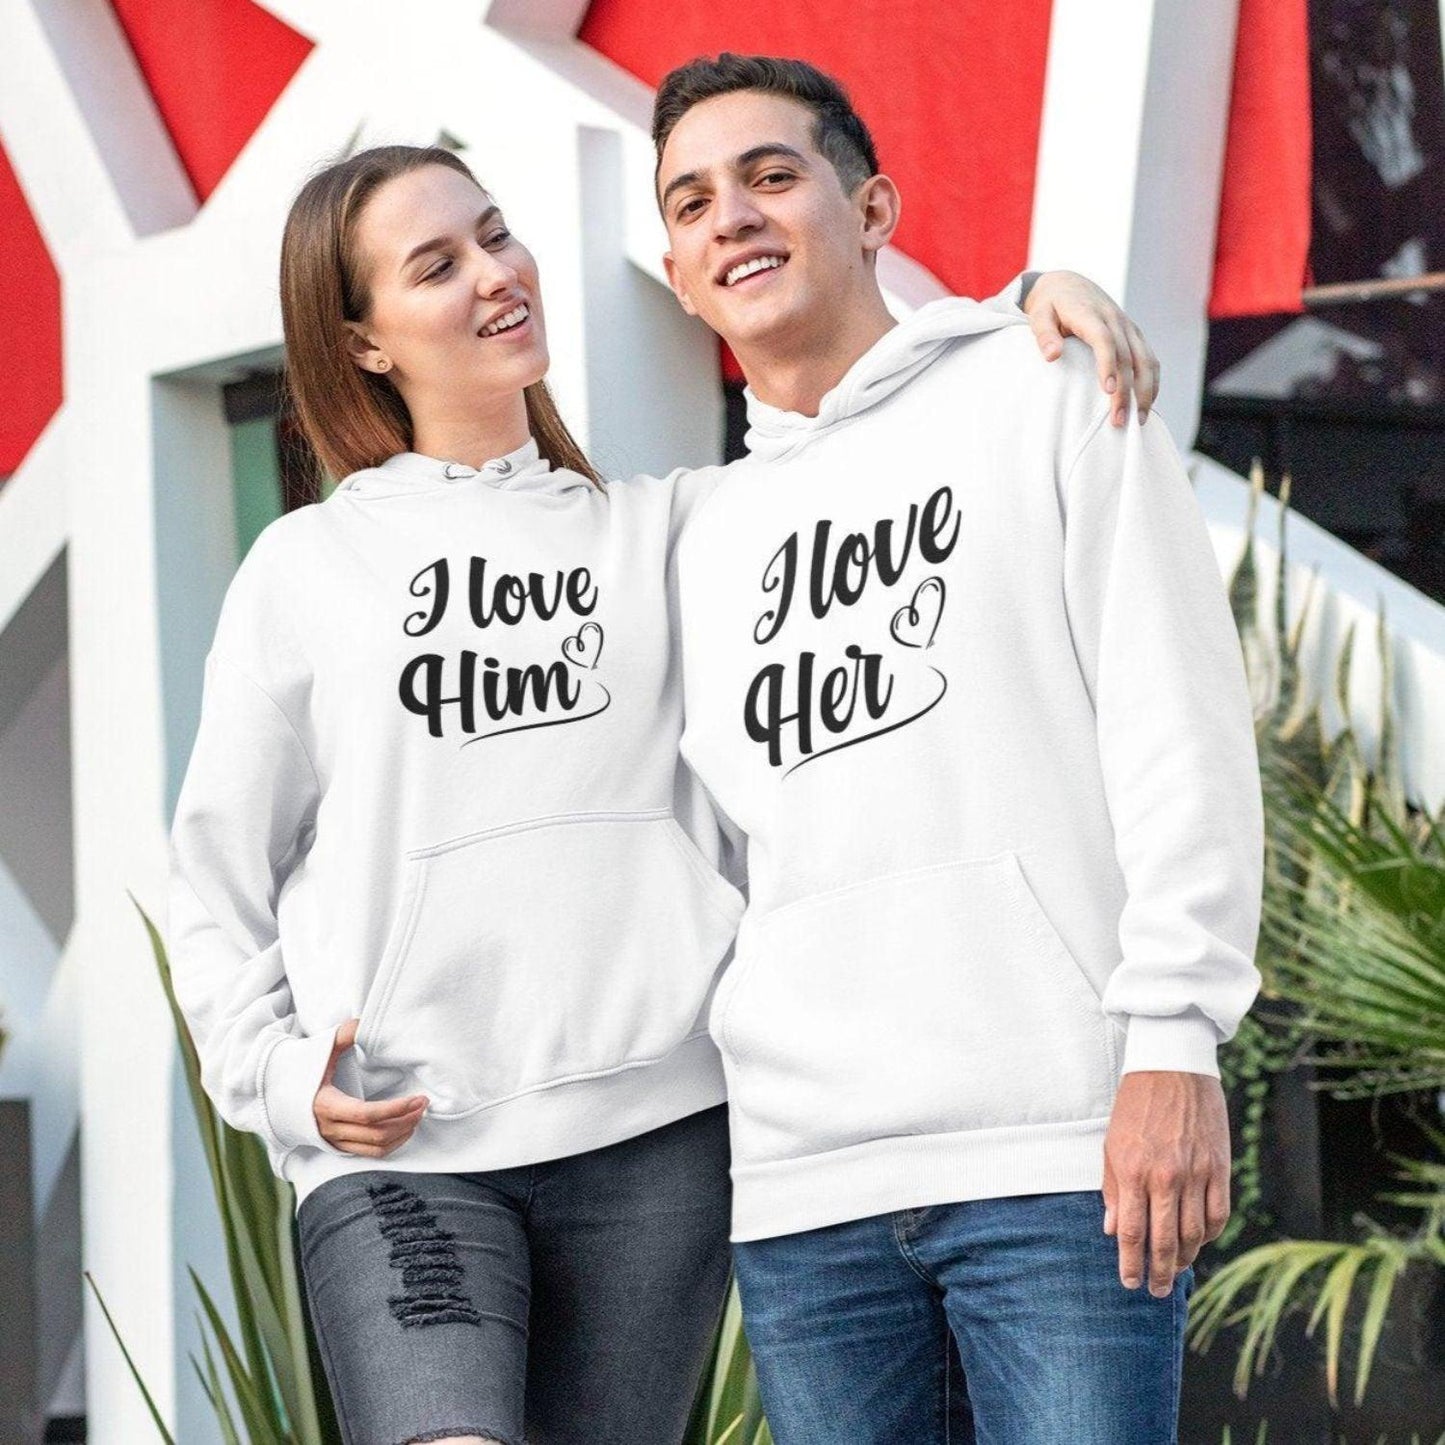 Charming "I Love Him" and "I Love Her" Perfect Matching Outfit Set. Adorable Duo Wear! - 4Lovebirds